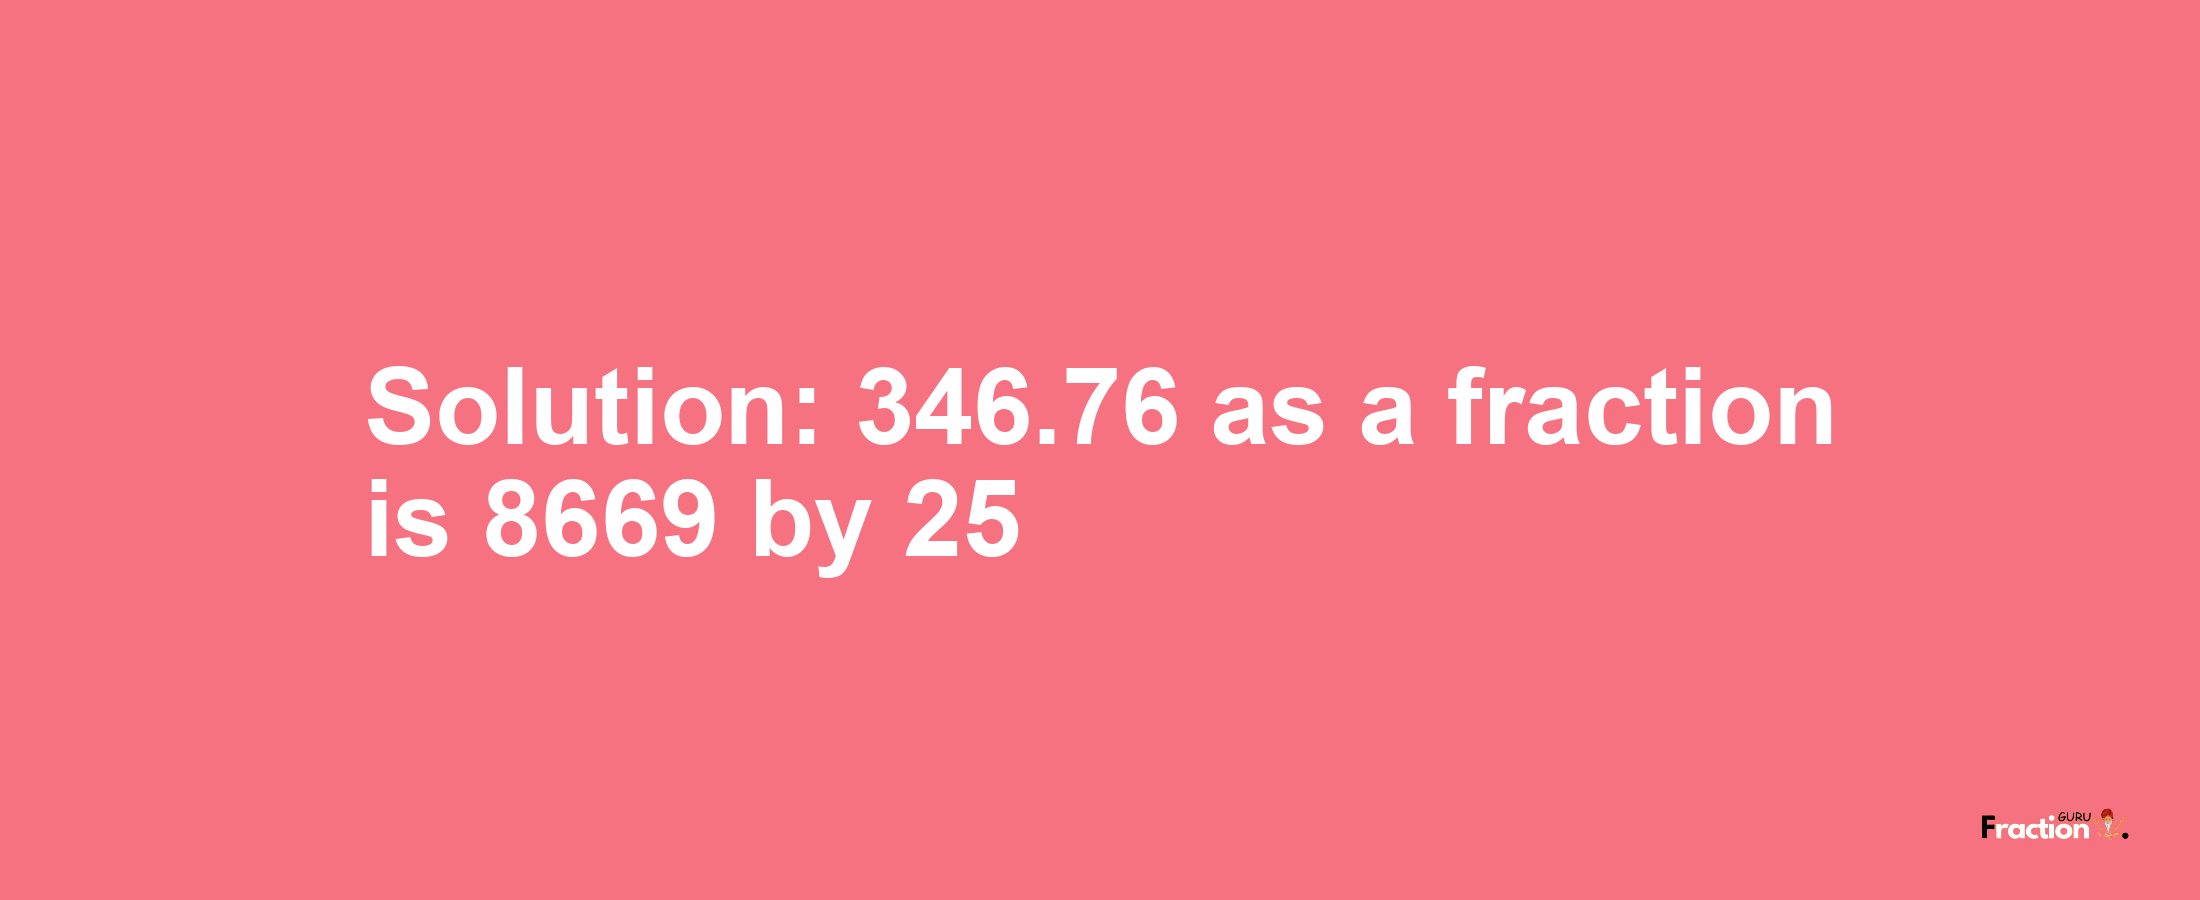 Solution:346.76 as a fraction is 8669/25